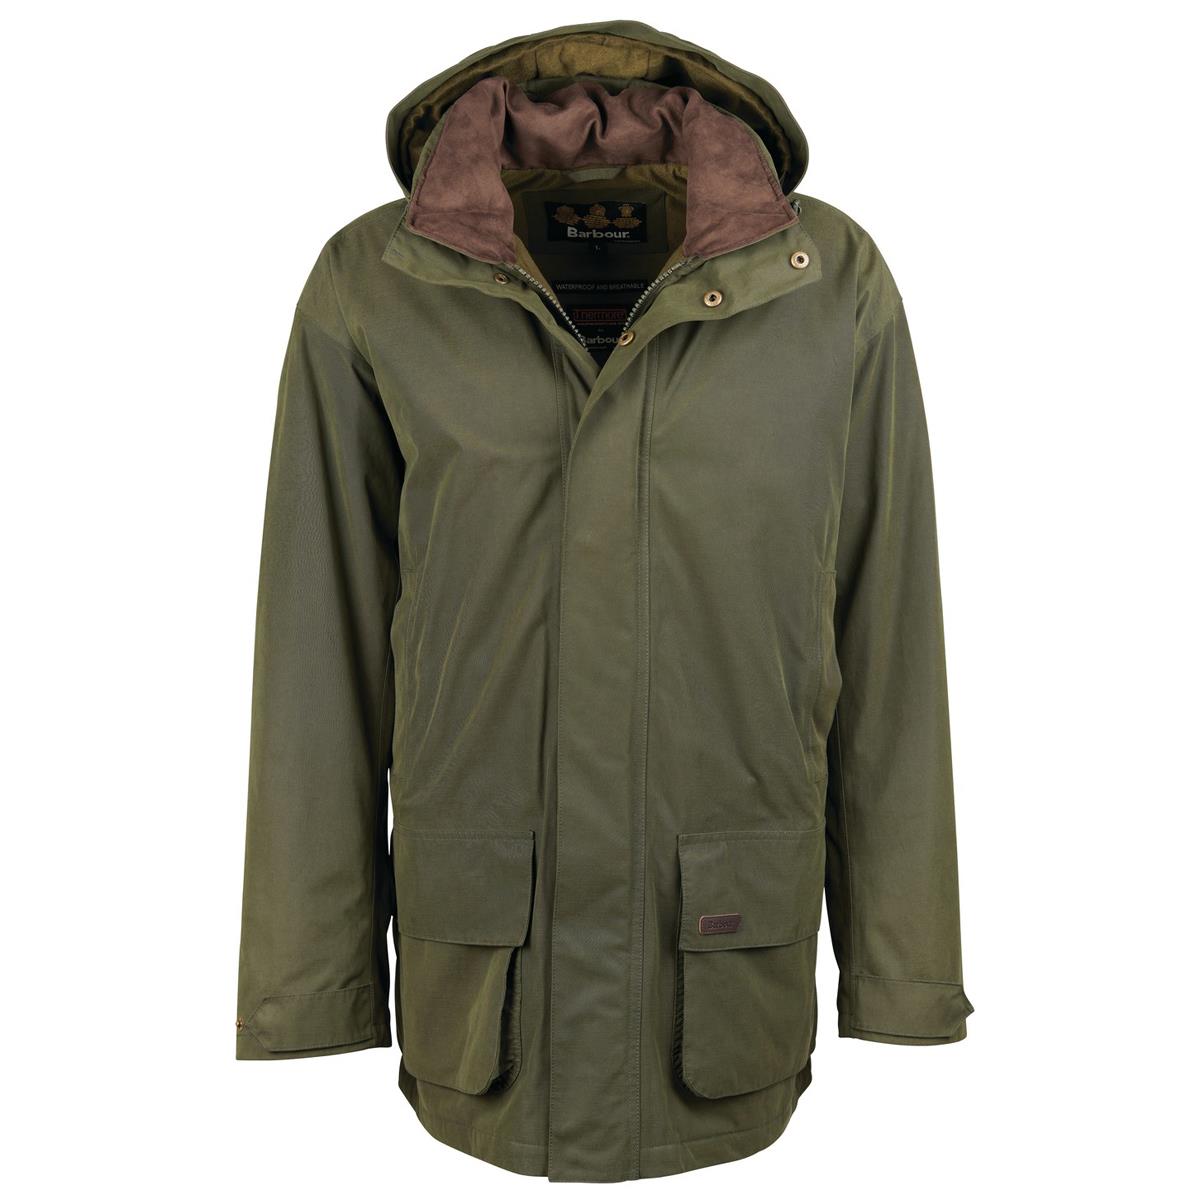 In what colors and sizes can one find the Barbour Mens Beaconsfield Jacket?